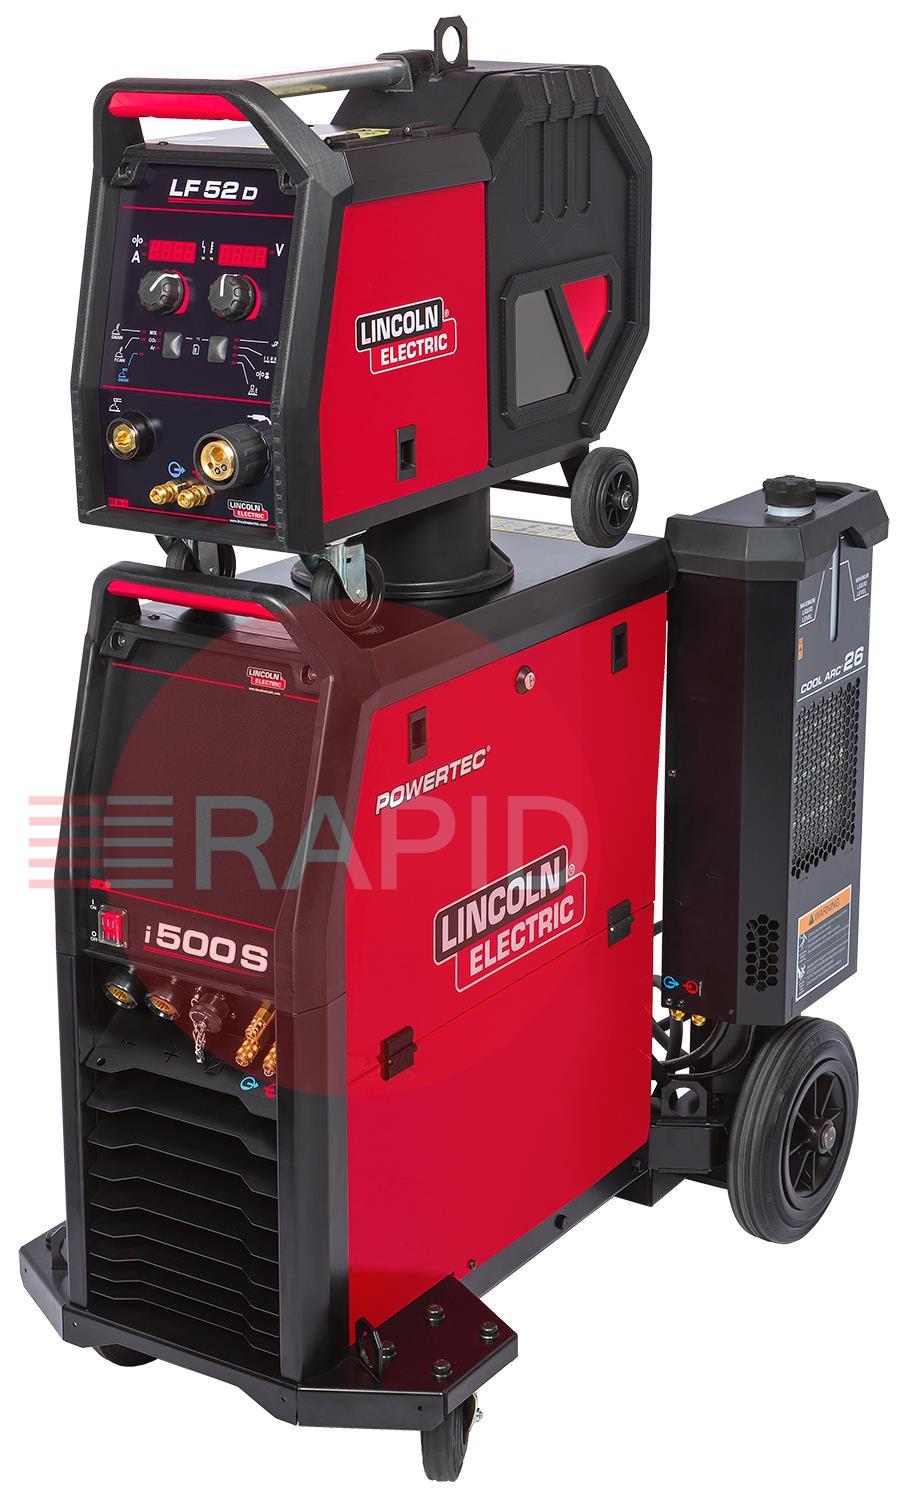 K14185-52-1WP  Lincoln Powertec i500S MIG Welder & LF-52D Wire Feeder Water Cooled Ready To Weld Package - 400v, 3ph